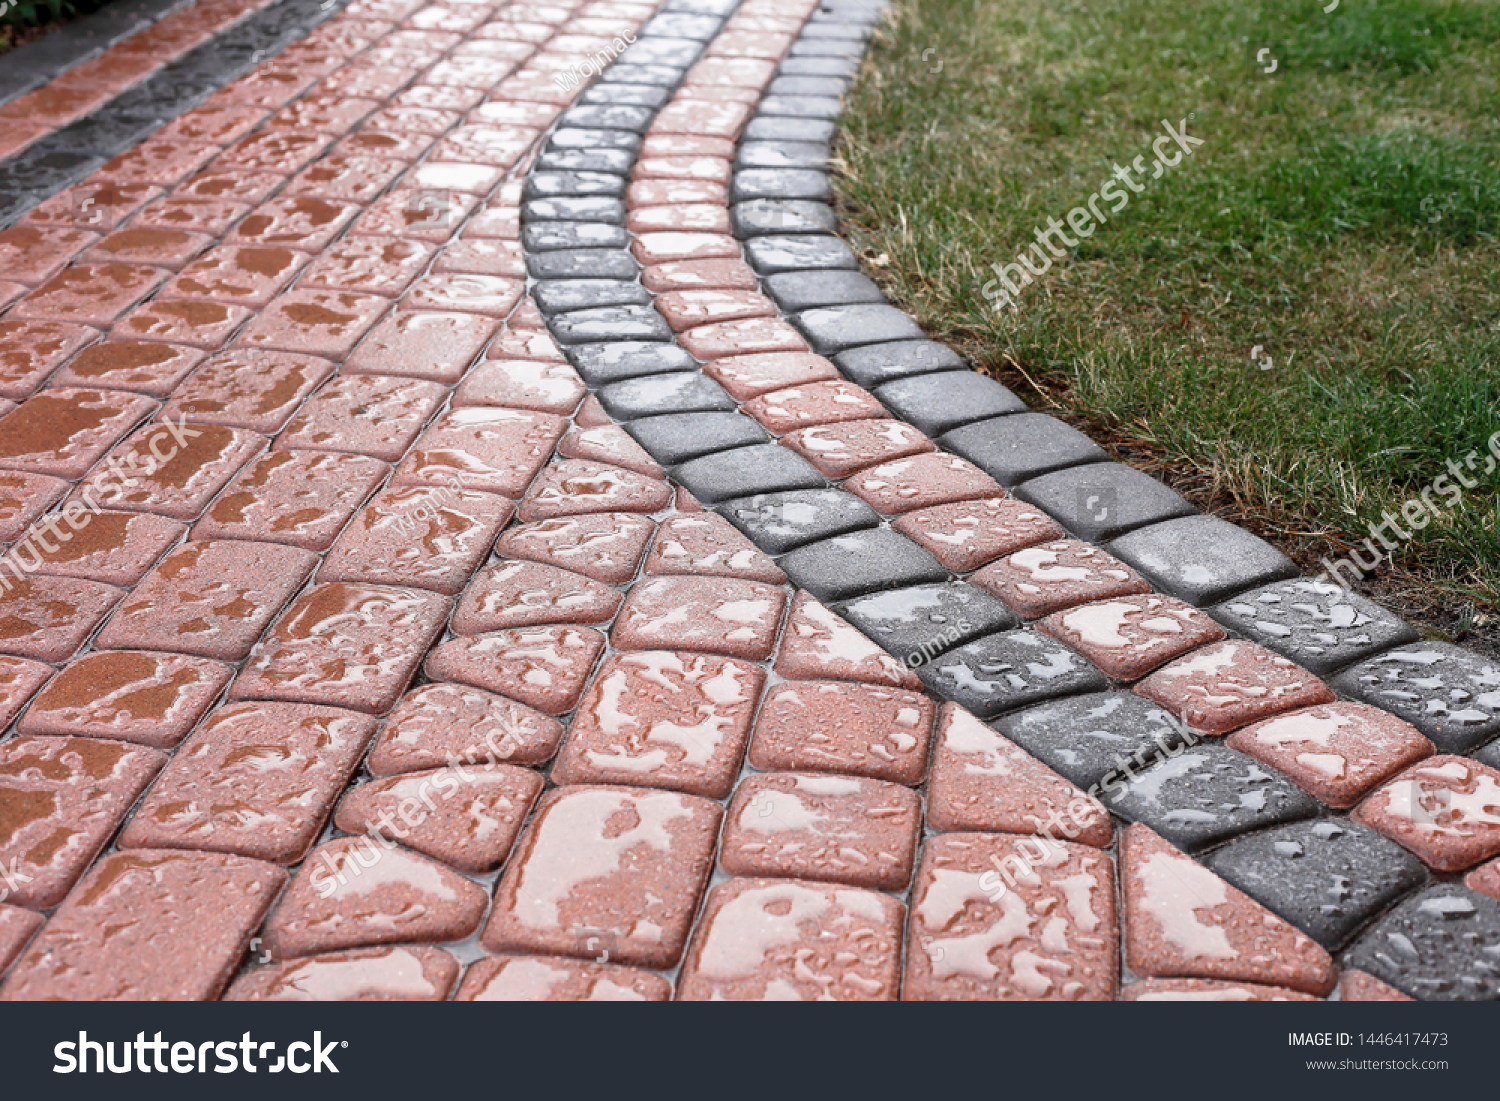 impregnated paving stones on the path not receiving rainwater #1446417473